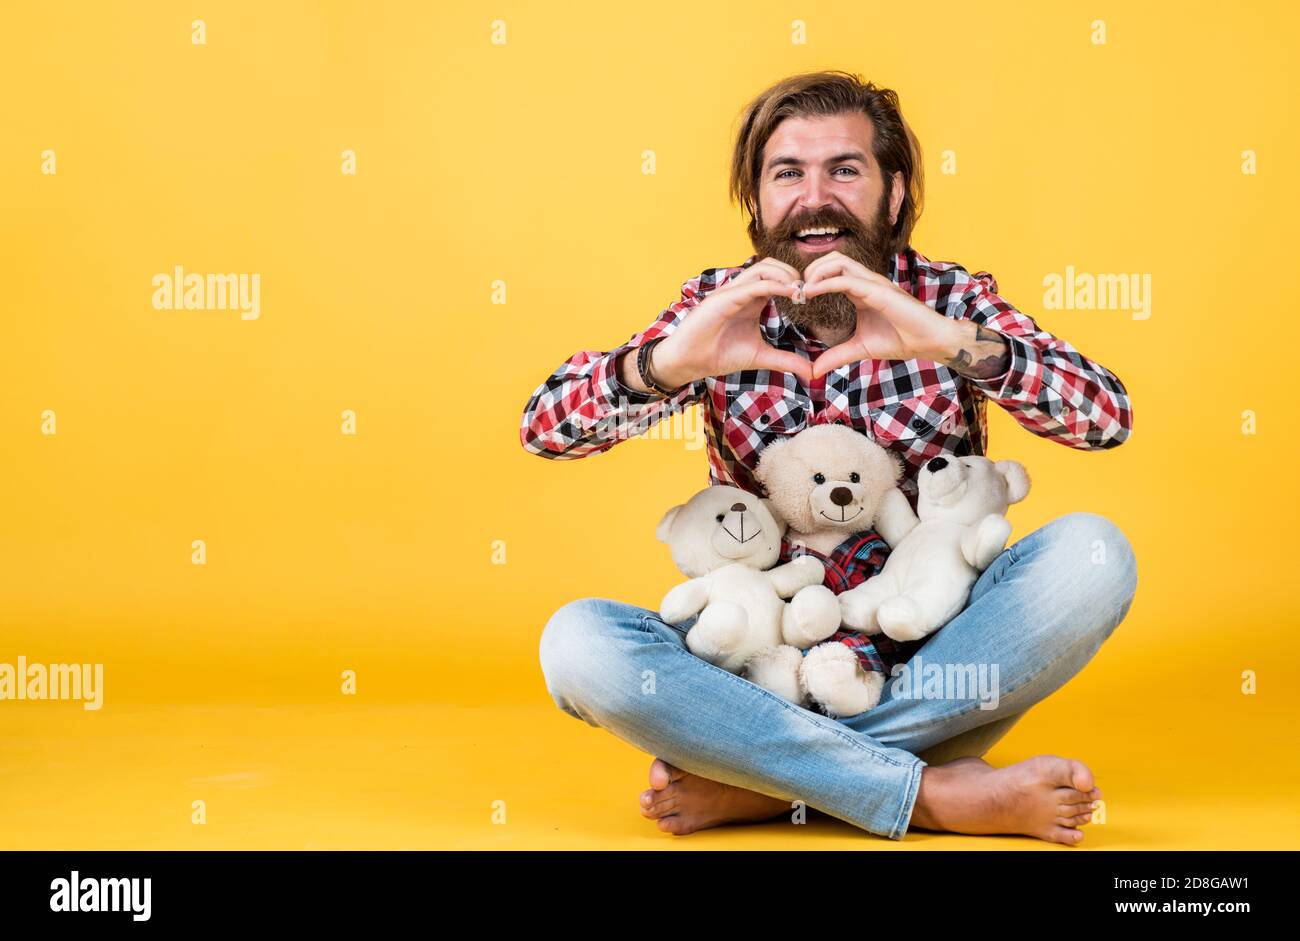 concept of love. Childish mood concept. guy enjoy valentines day. best present ever. Valentines day gift for beloved. Holiday celebration concept. Guy with happy face plays with soft toy. Stock Photo